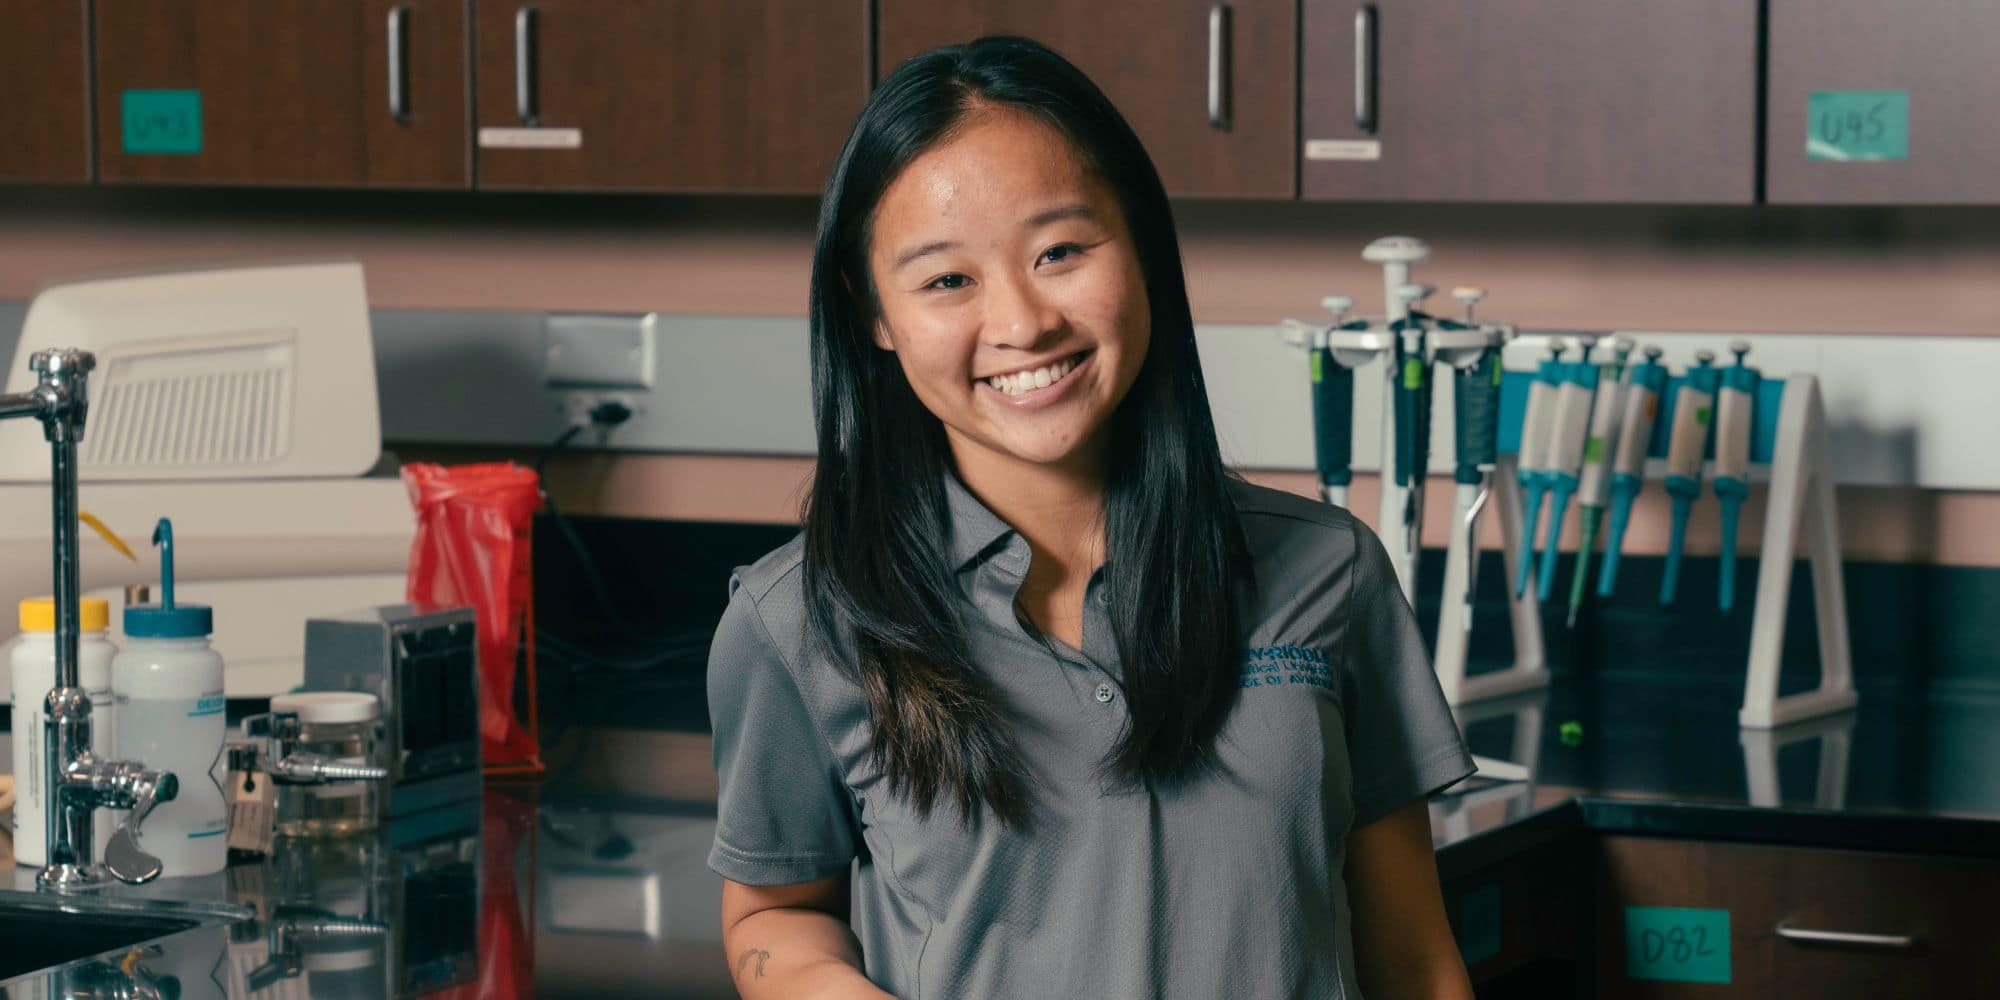 Raelyn Yoshioka, an Applied Biology major at Embry-Riddle, has undertaken undergraduate research involving the study of bed bug fabric preferences